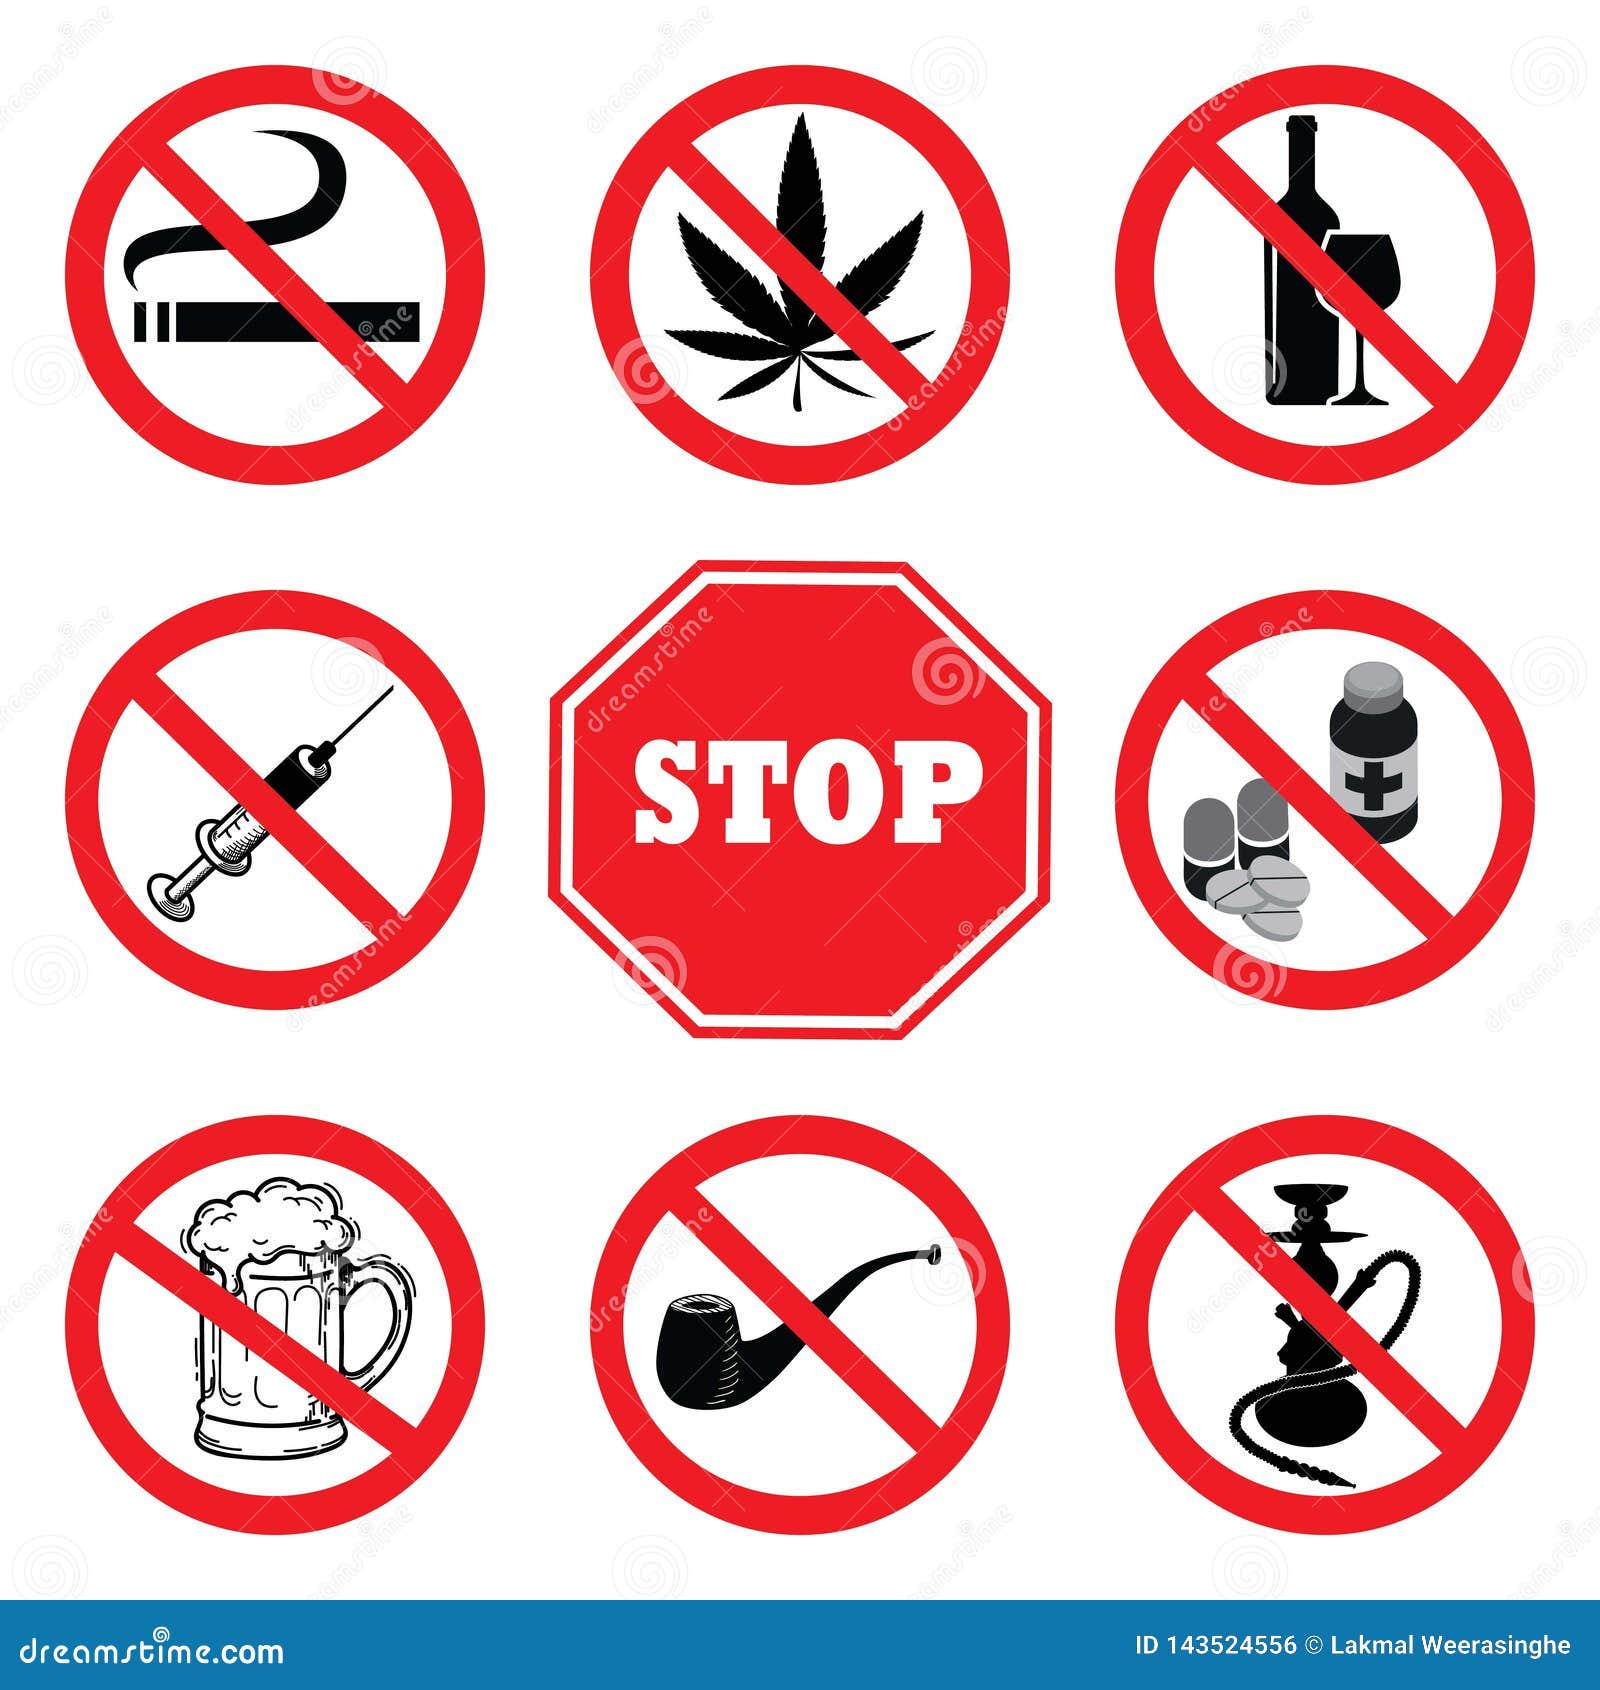 Say Clipart PNG Images, Say No To Drugs Life, Stop Drugs, No Drugs, Drugs  PNG Image For Free Download